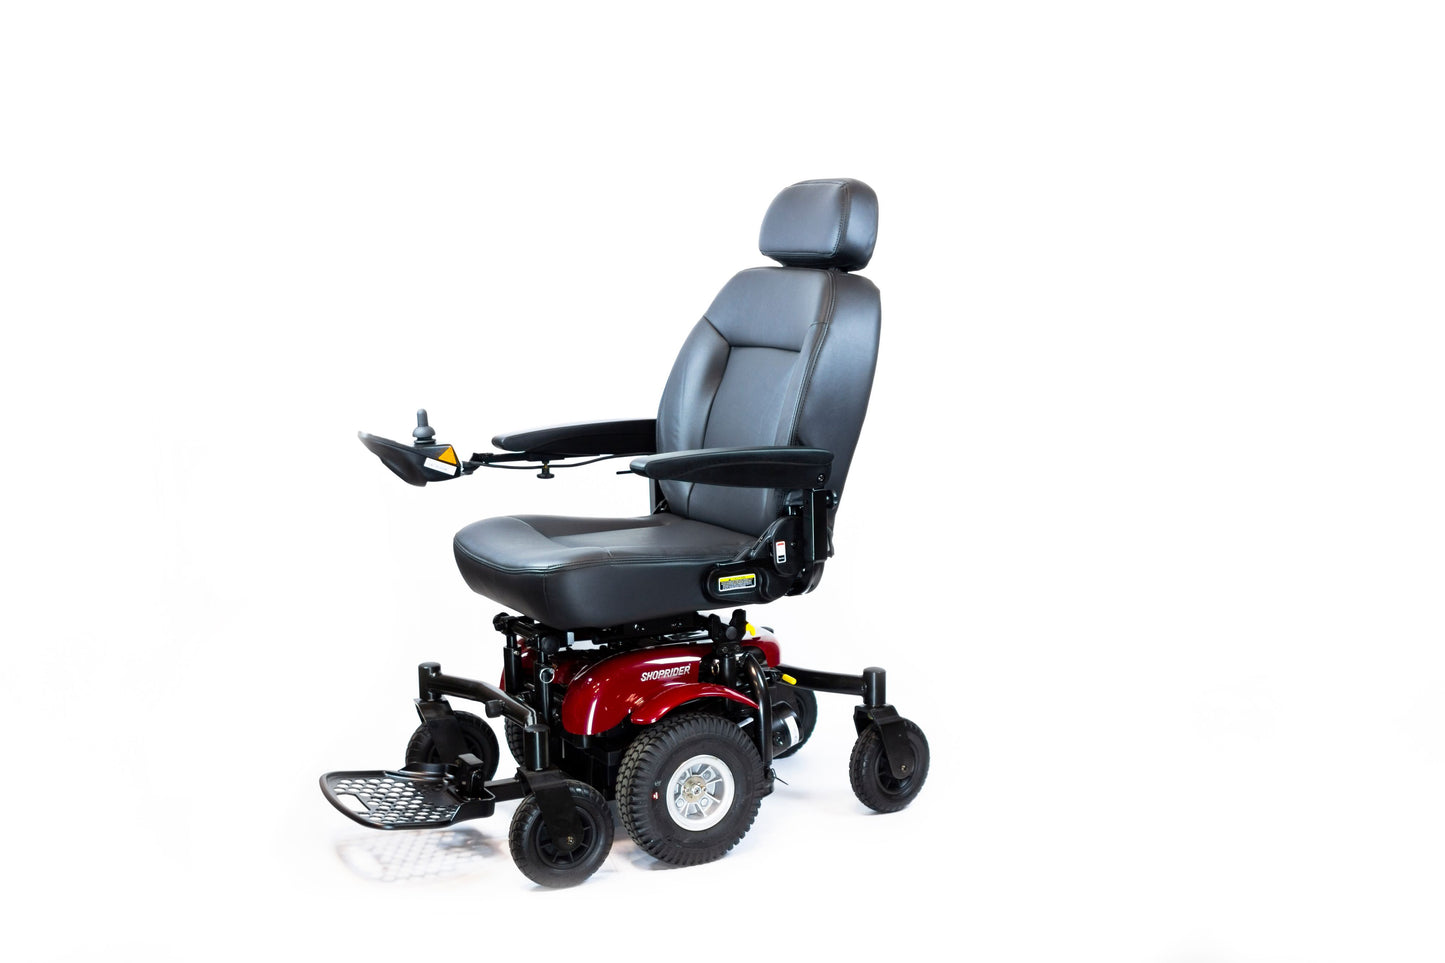 Shoprider 6Runner 10 Power Wheelchair Red - Recliner Seat, Added Suspension For Smooth and Comfortable Ride - 300lbs Weight Capactiy